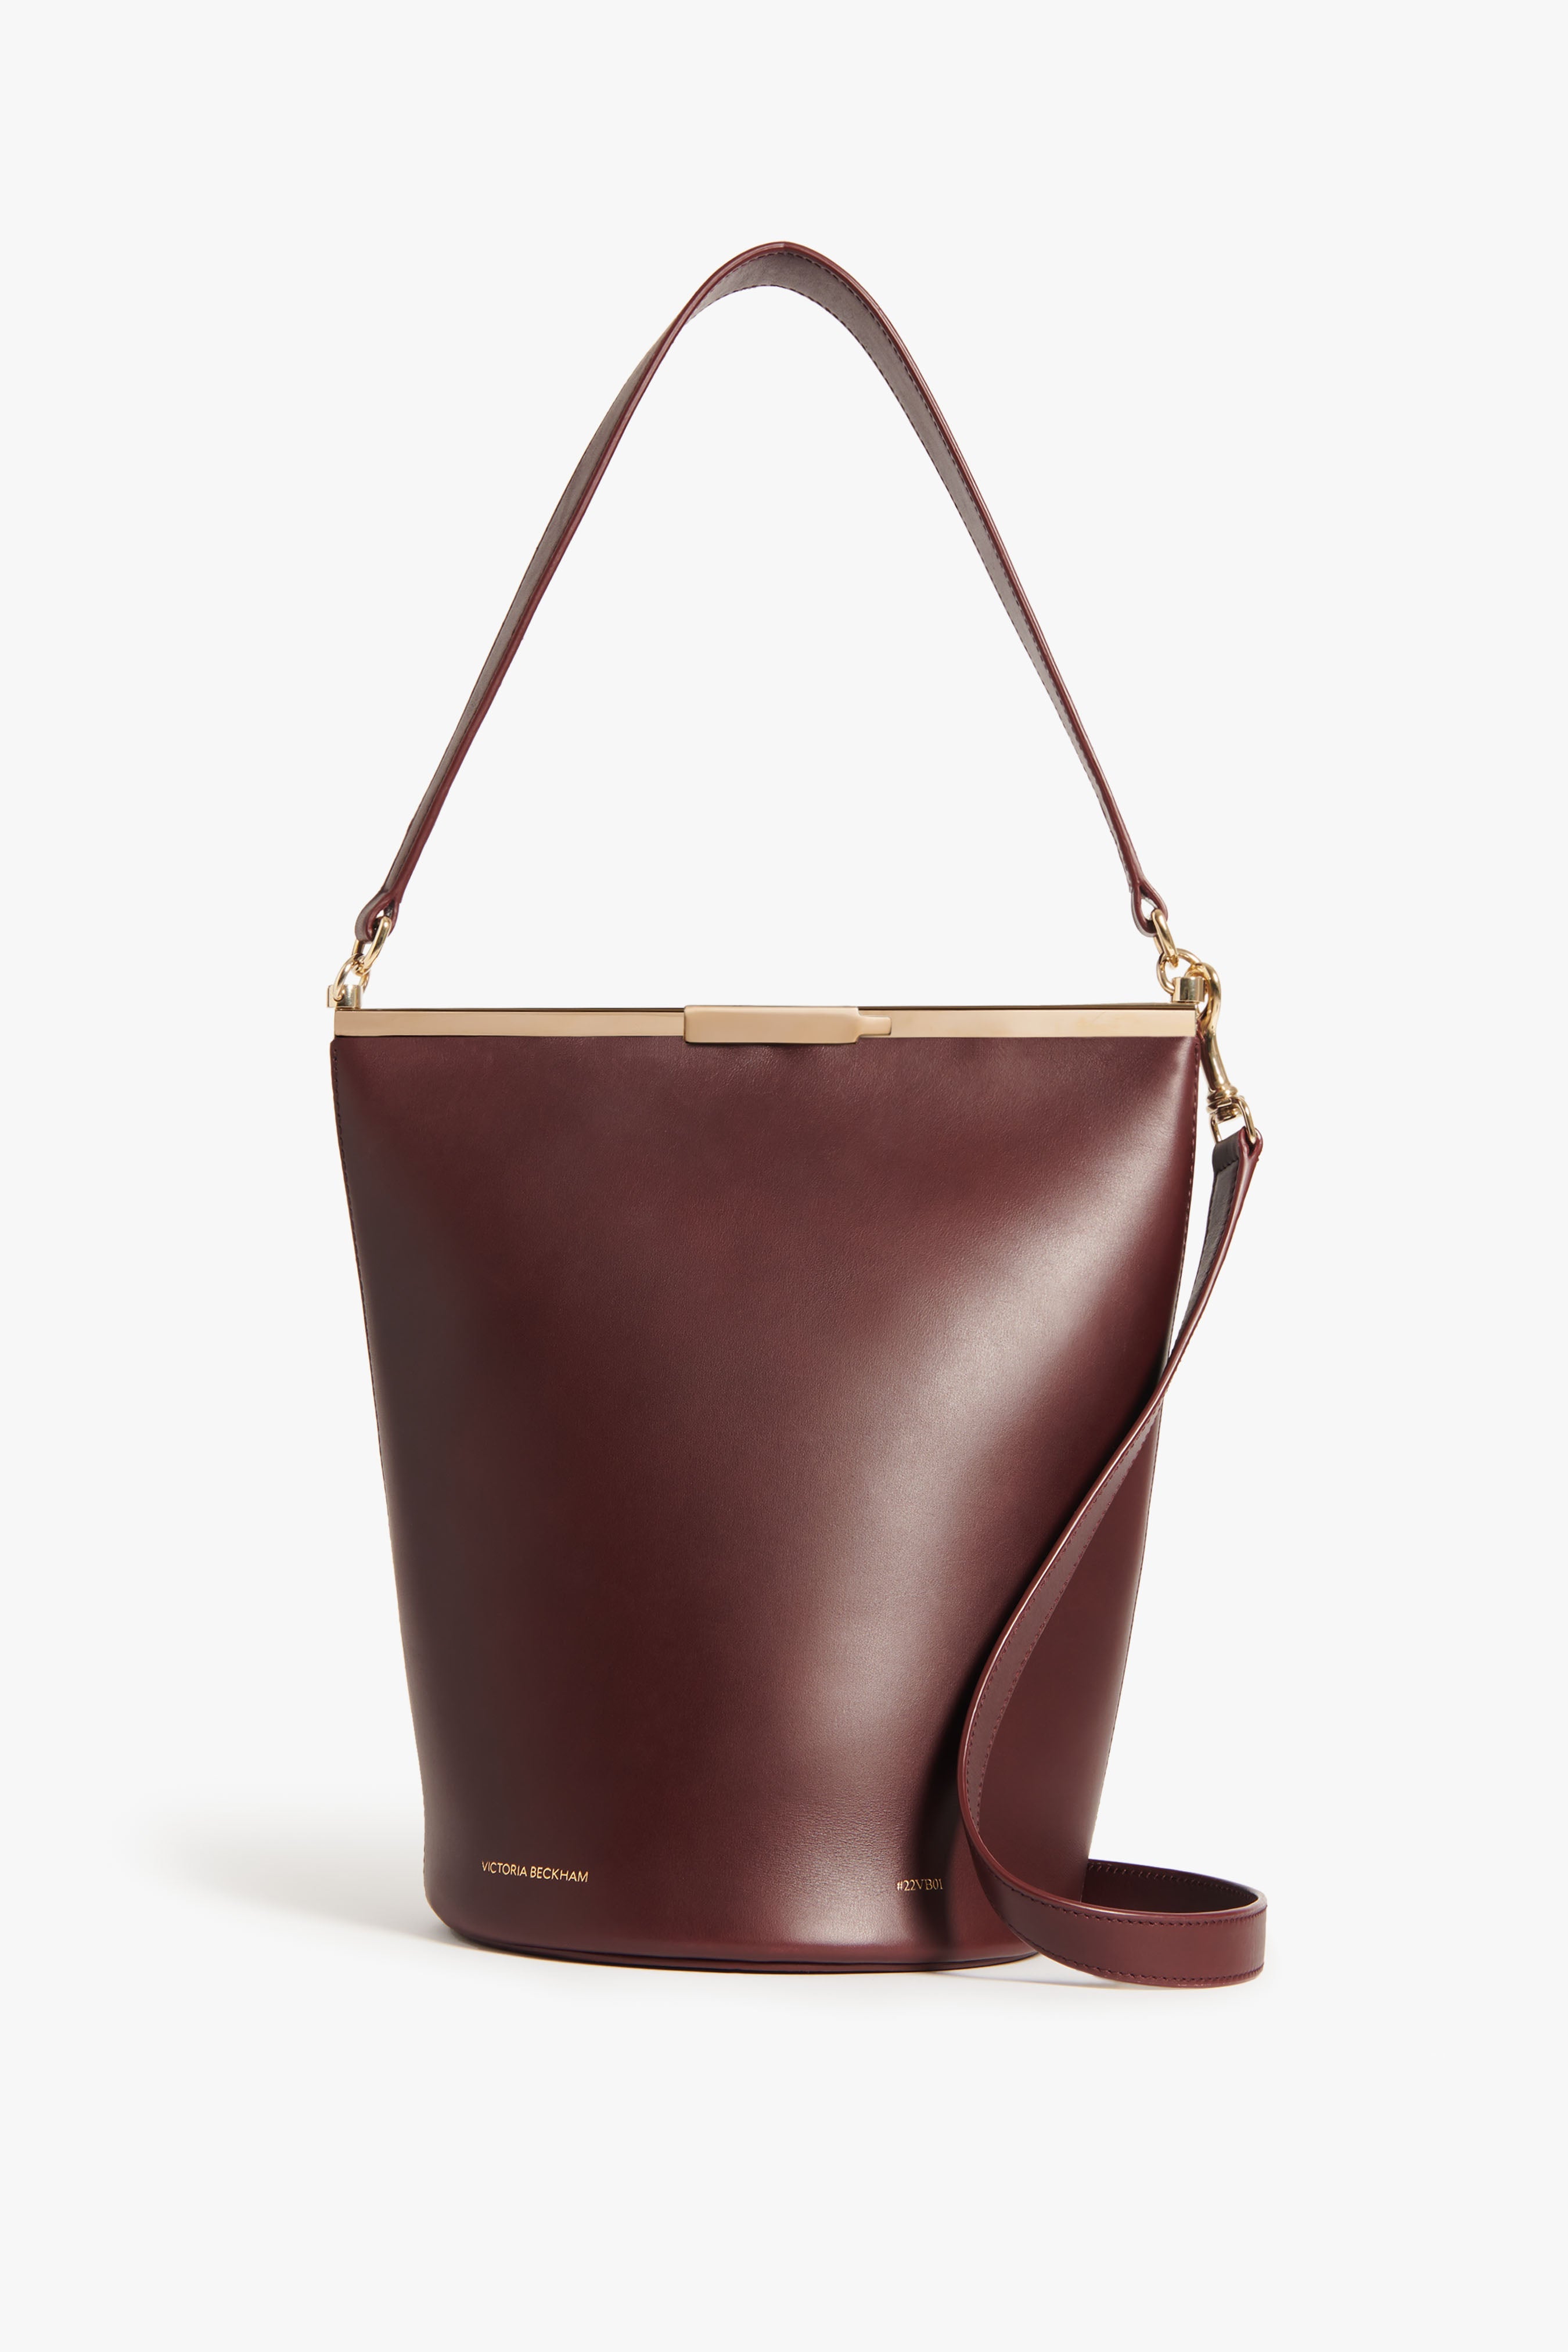 Co - Small Pebbled Leather Bucket Bag